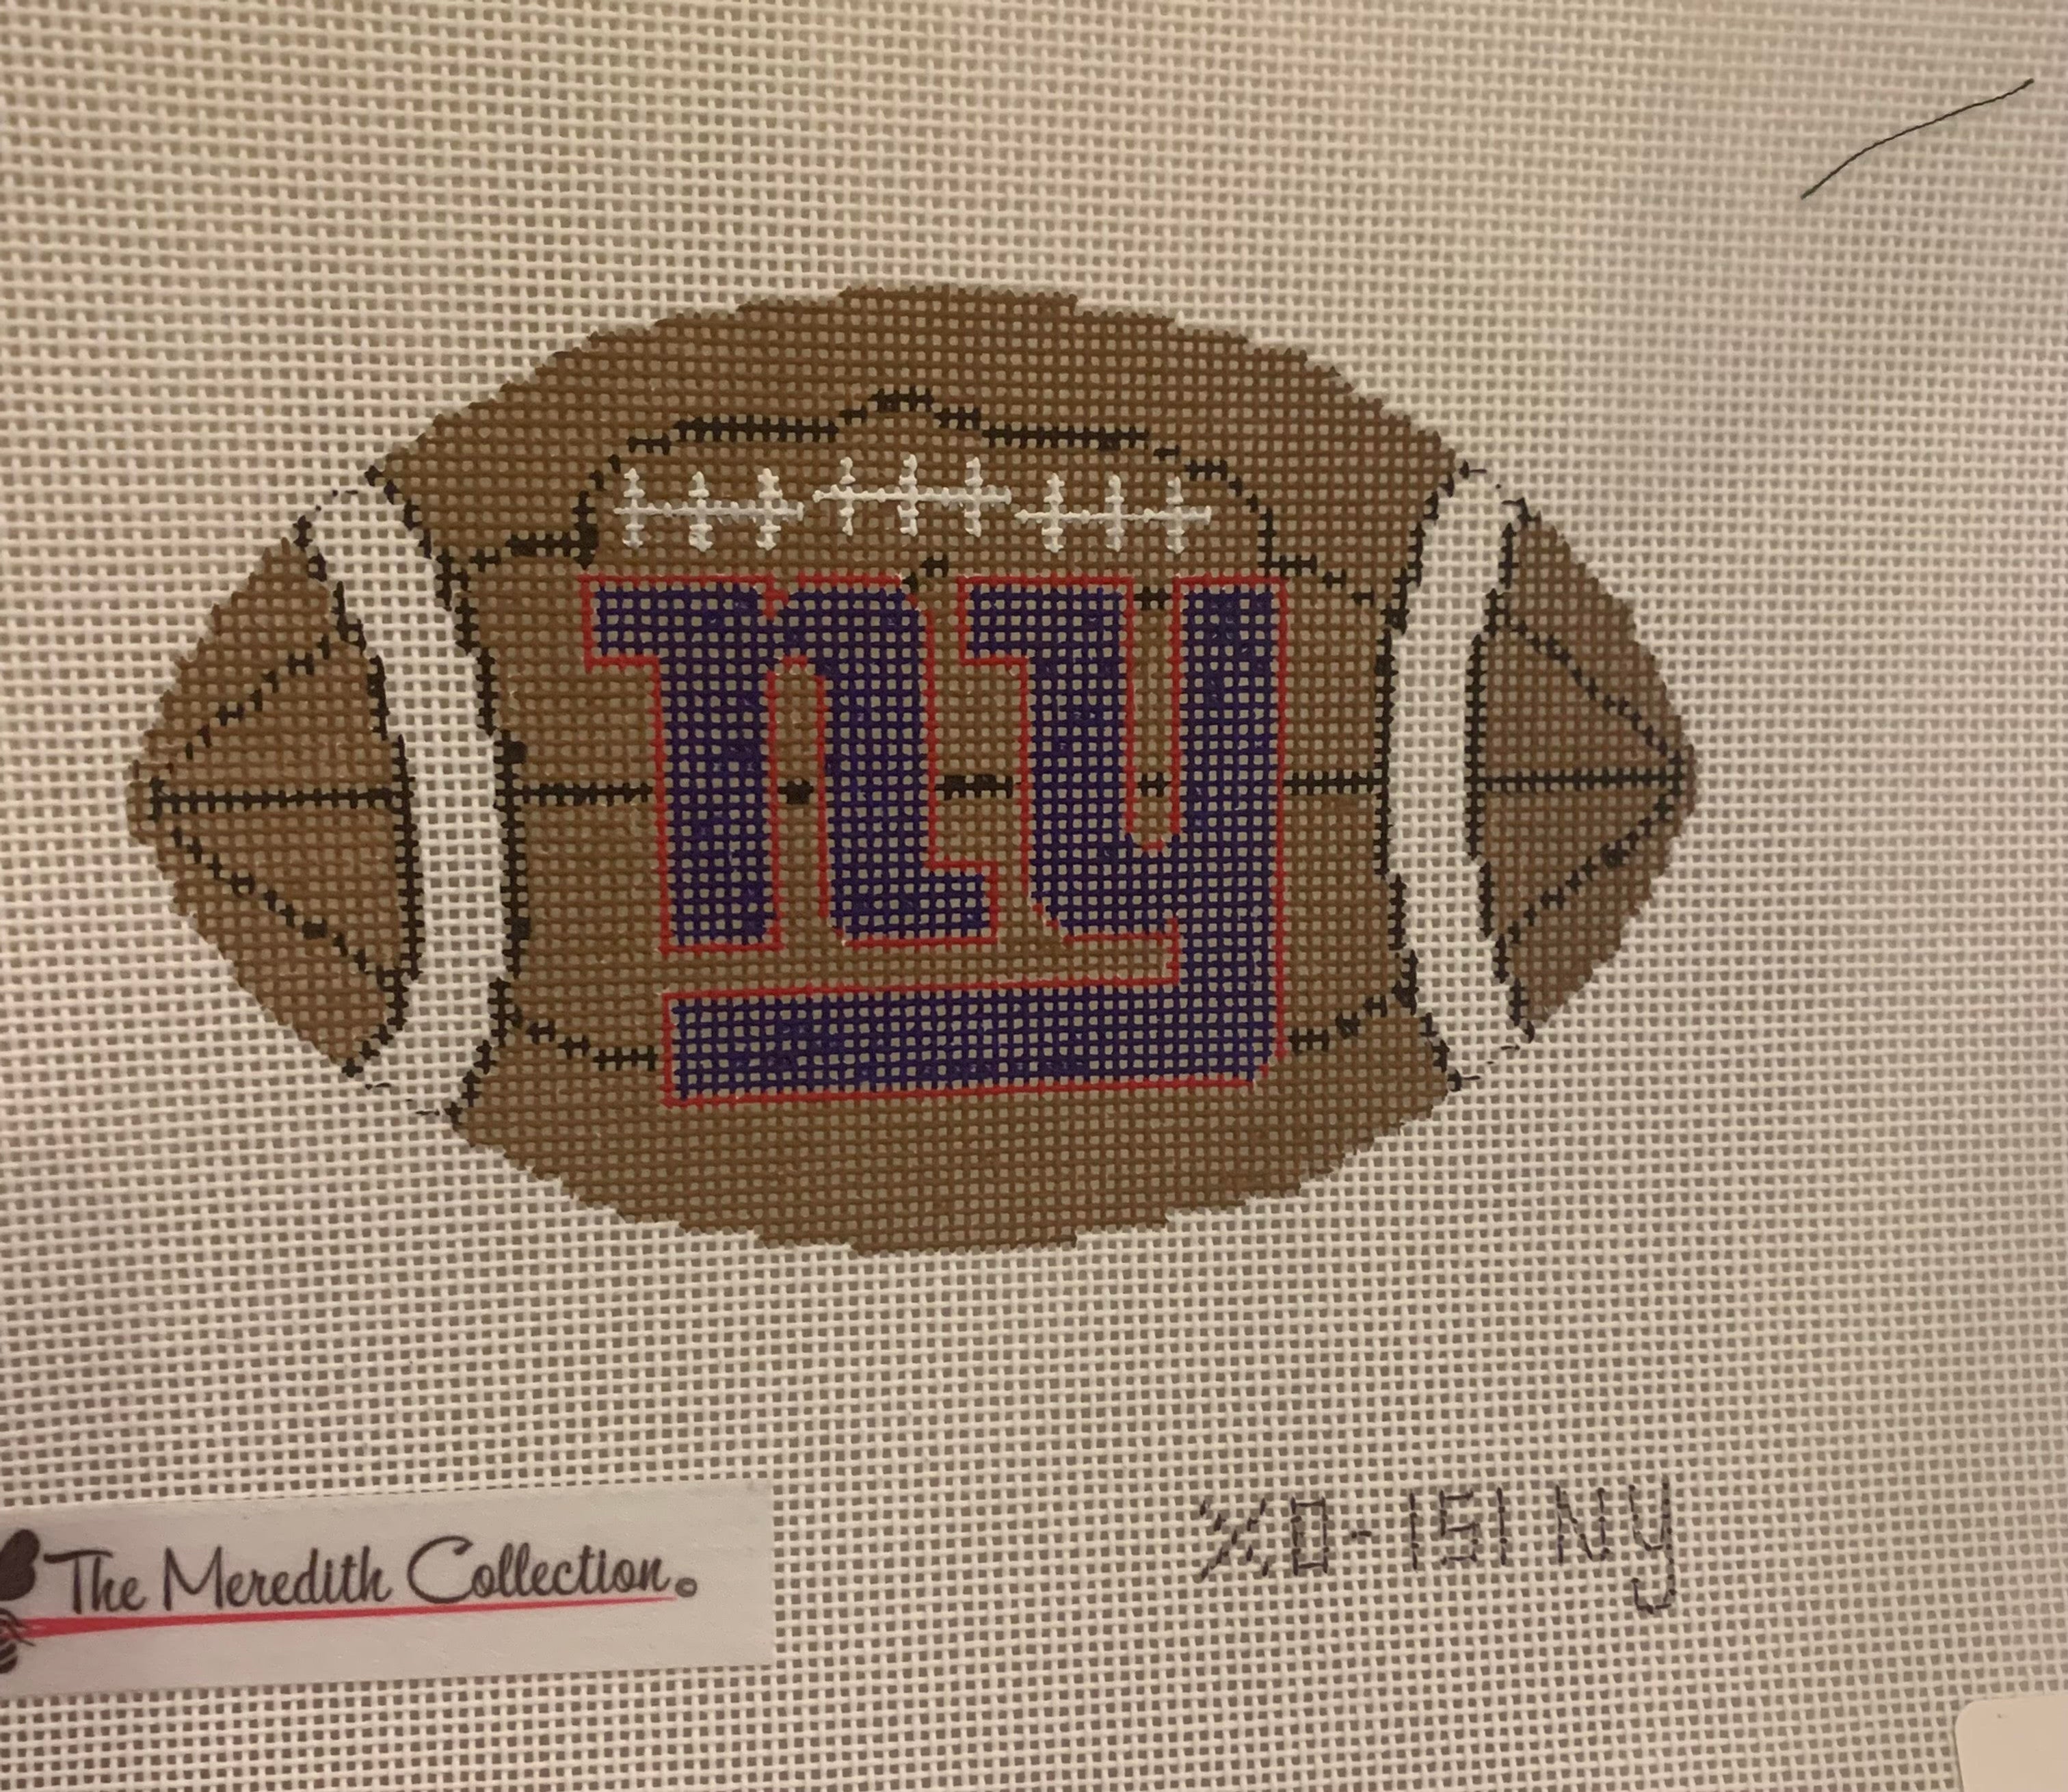 Meredith Collection X0-151 NY Giants Football